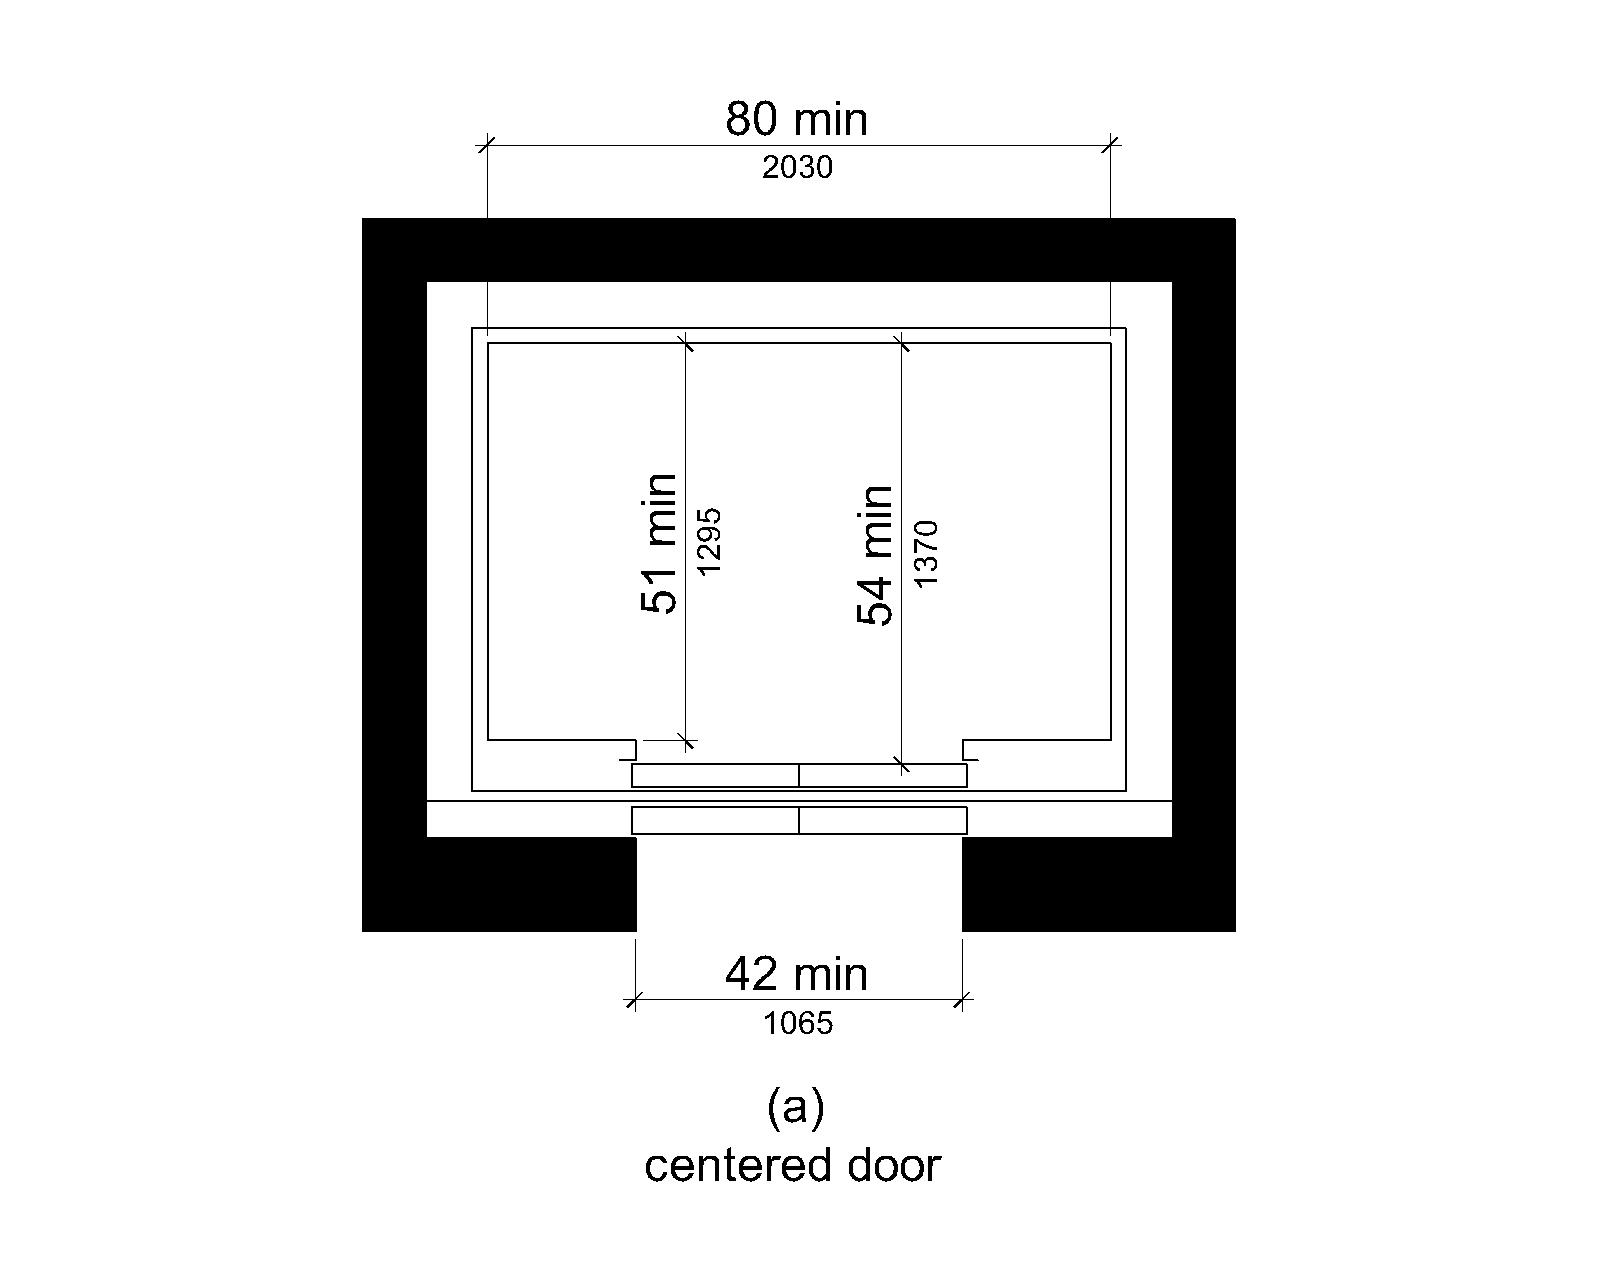 Figure (a) shows an elevator car with a centered door. The door clear width is 42 inches (1065 mm) minimum and the car width measured side to side is 80 inches (2030 mm) minimum. The car depth is 51 inches (1295 mm) minimum measured from the back wall to the front return, and 54 inches (1370 mm) minimum measured from the back wall to the inside face of the door.